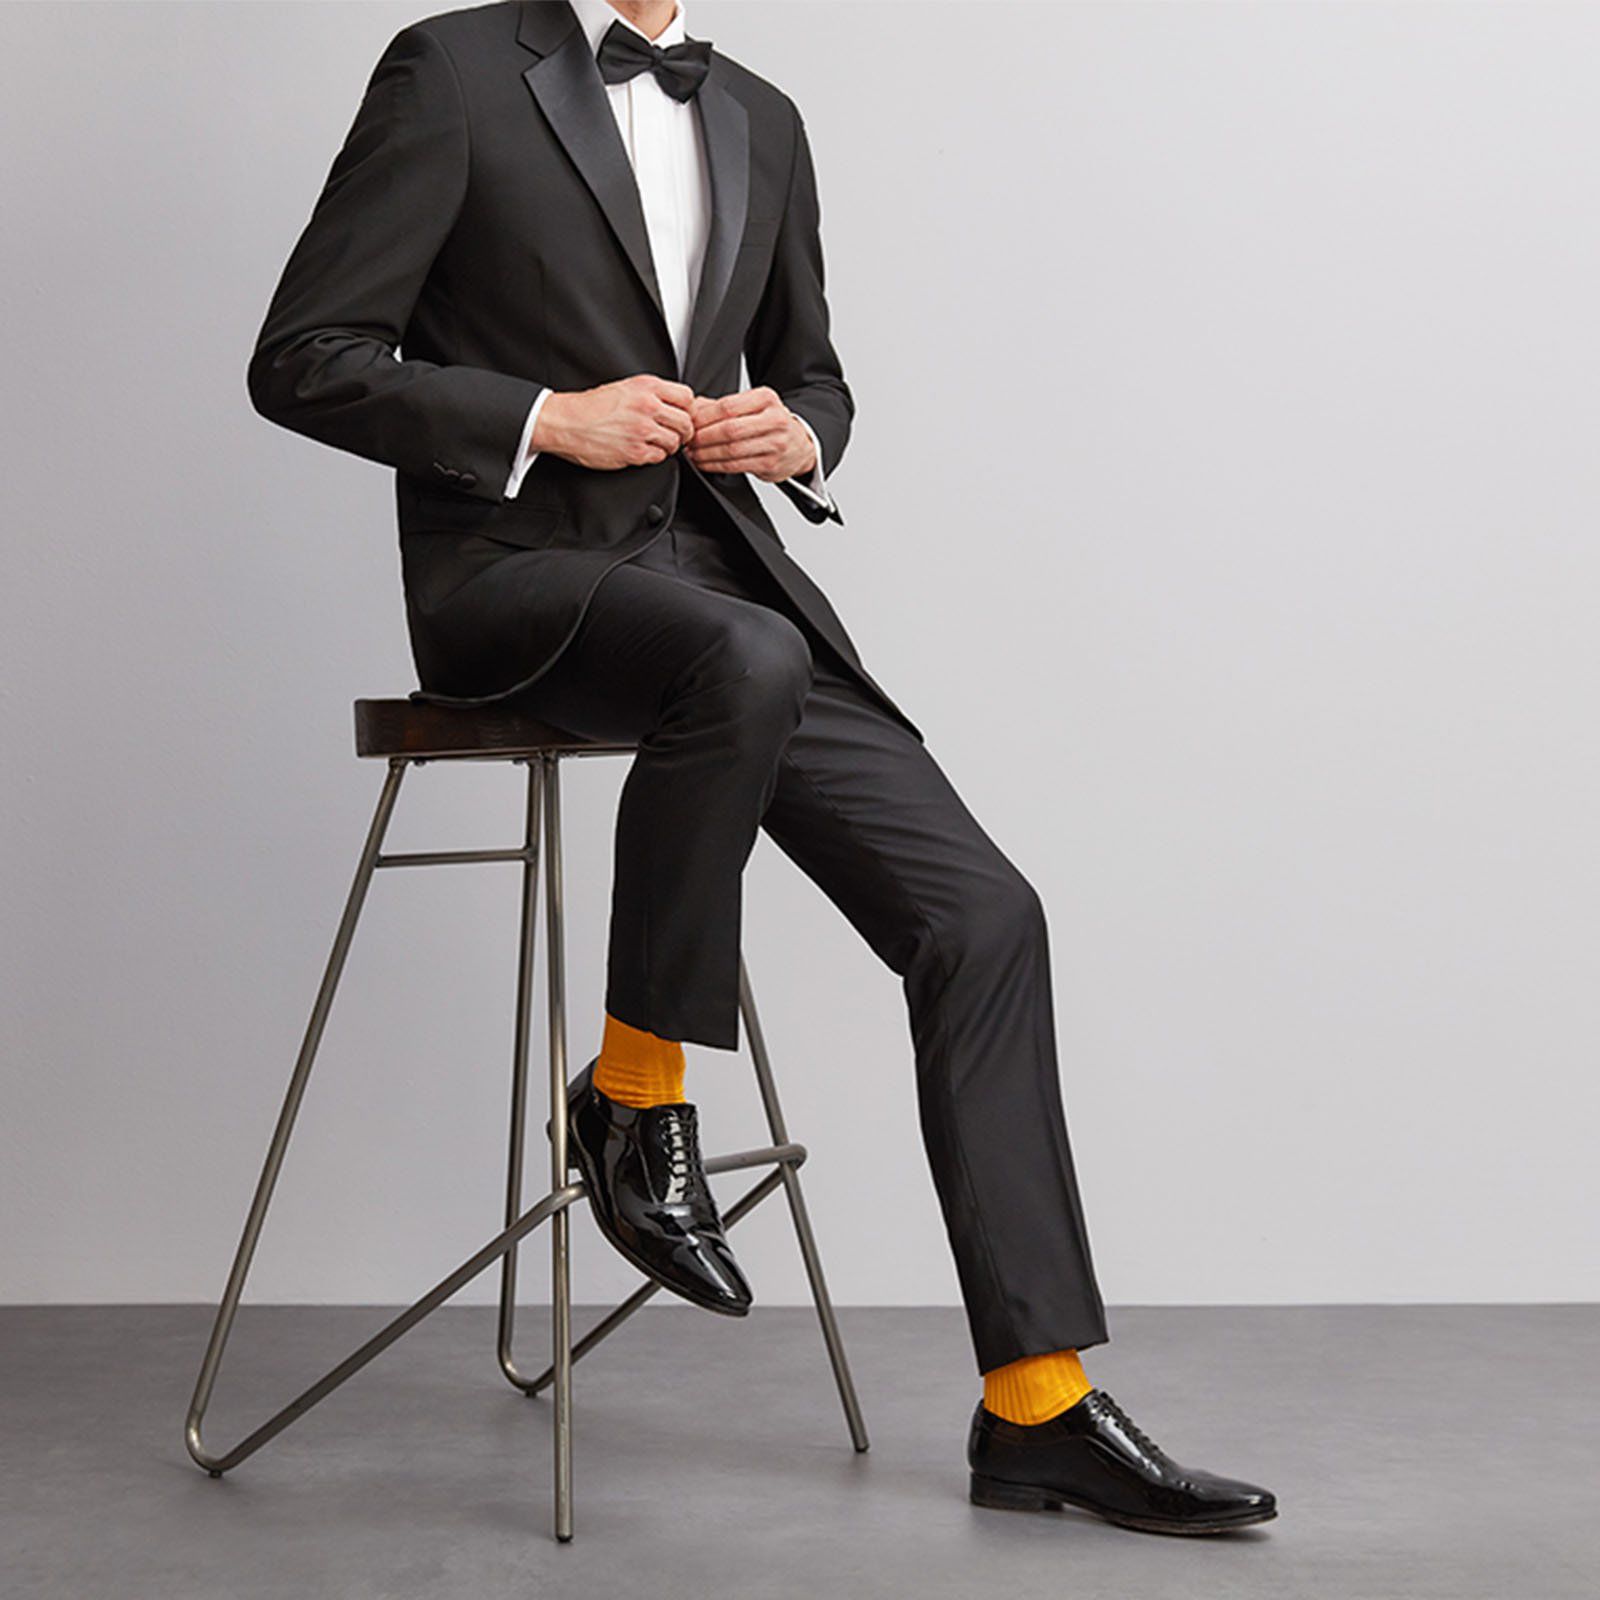 Christmas Party Suit with orange socks